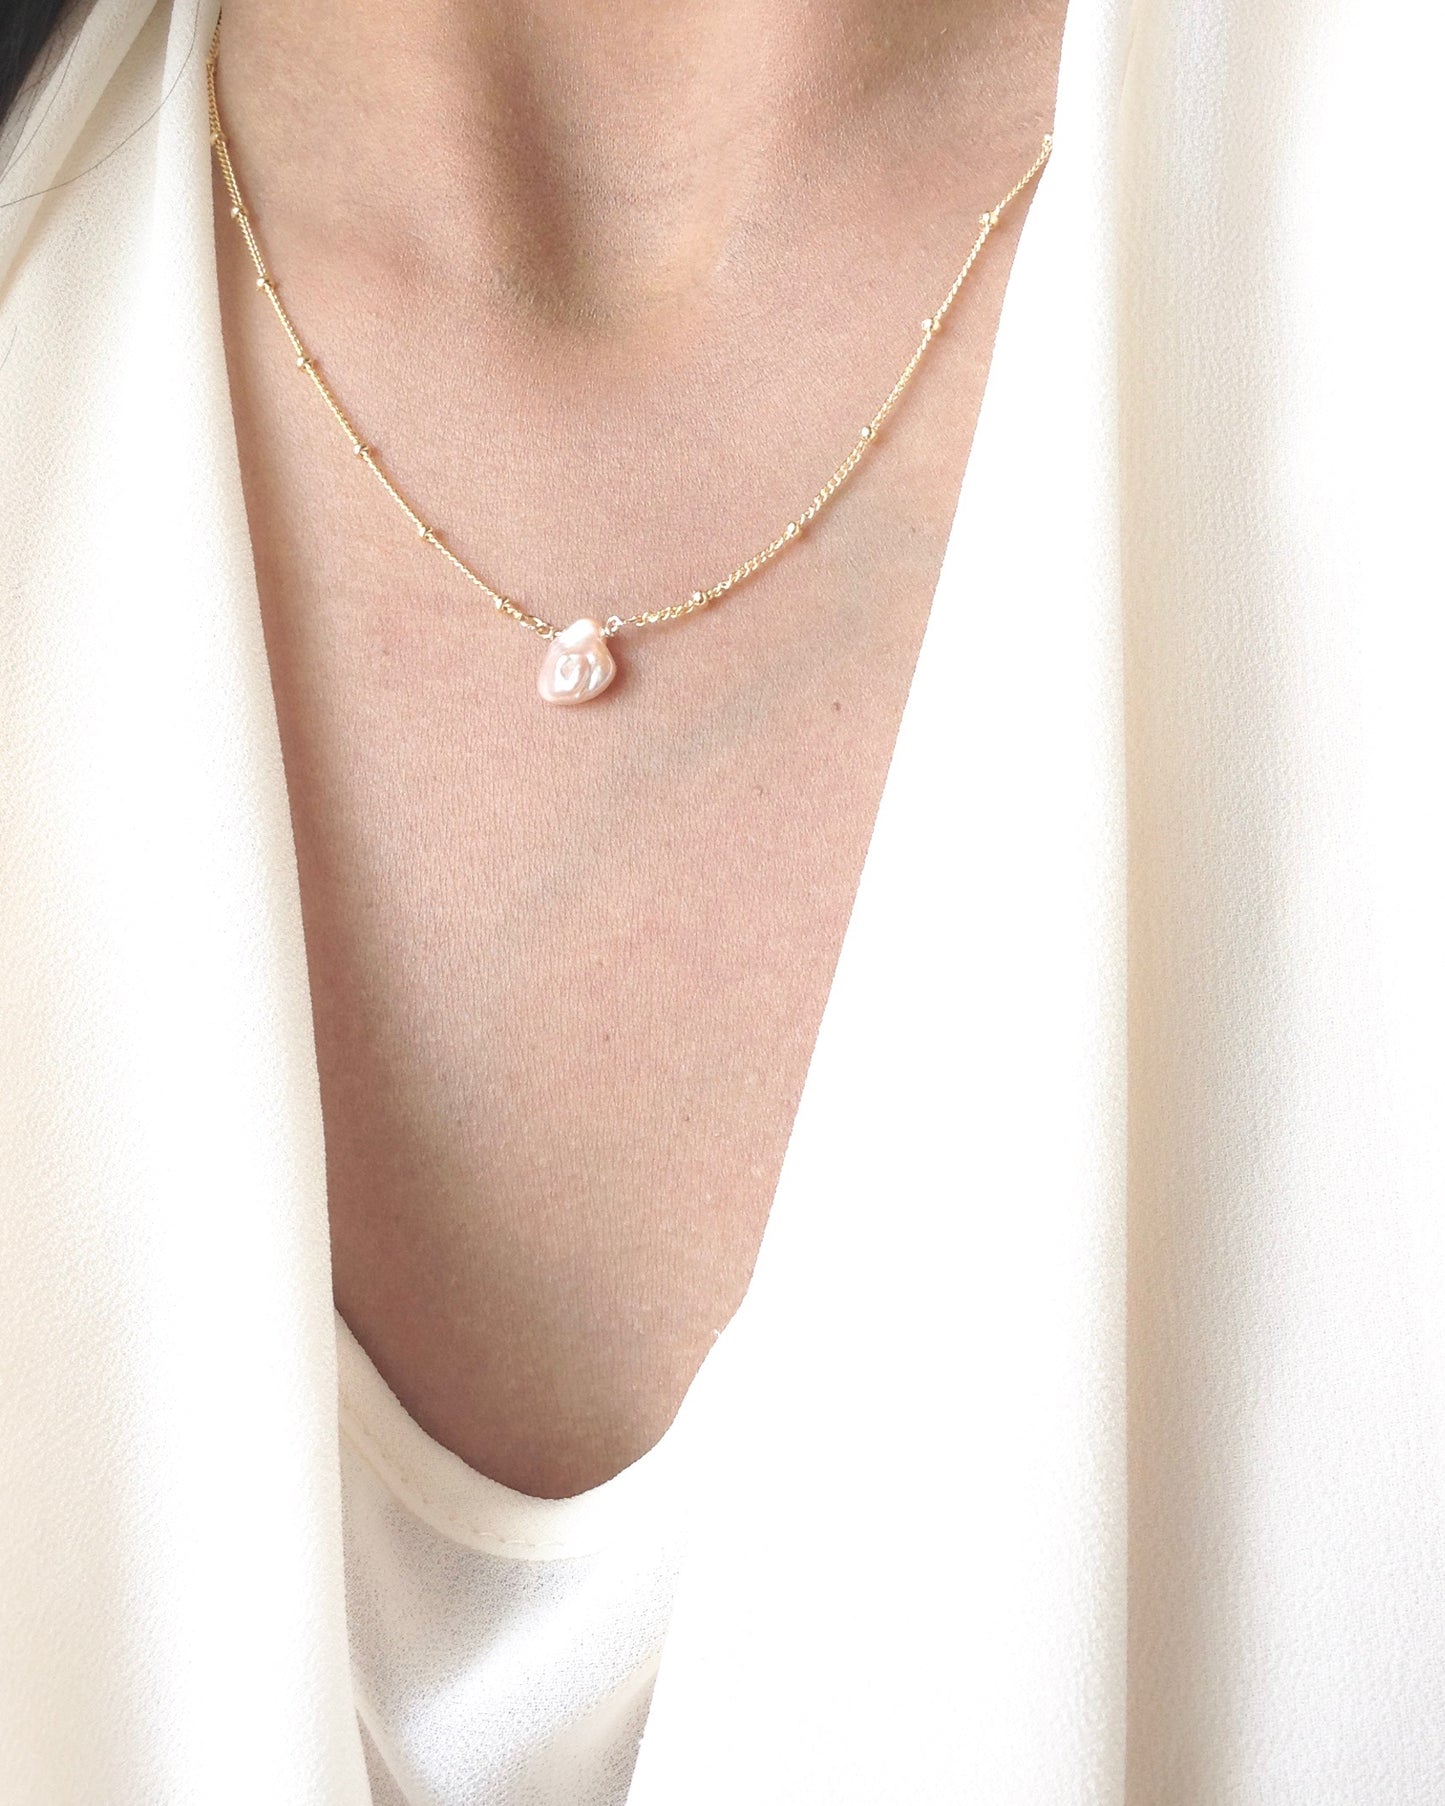 Simple Keshi Pearl Necklace in Gold Filled or Sterling Silver | IB Jewelry